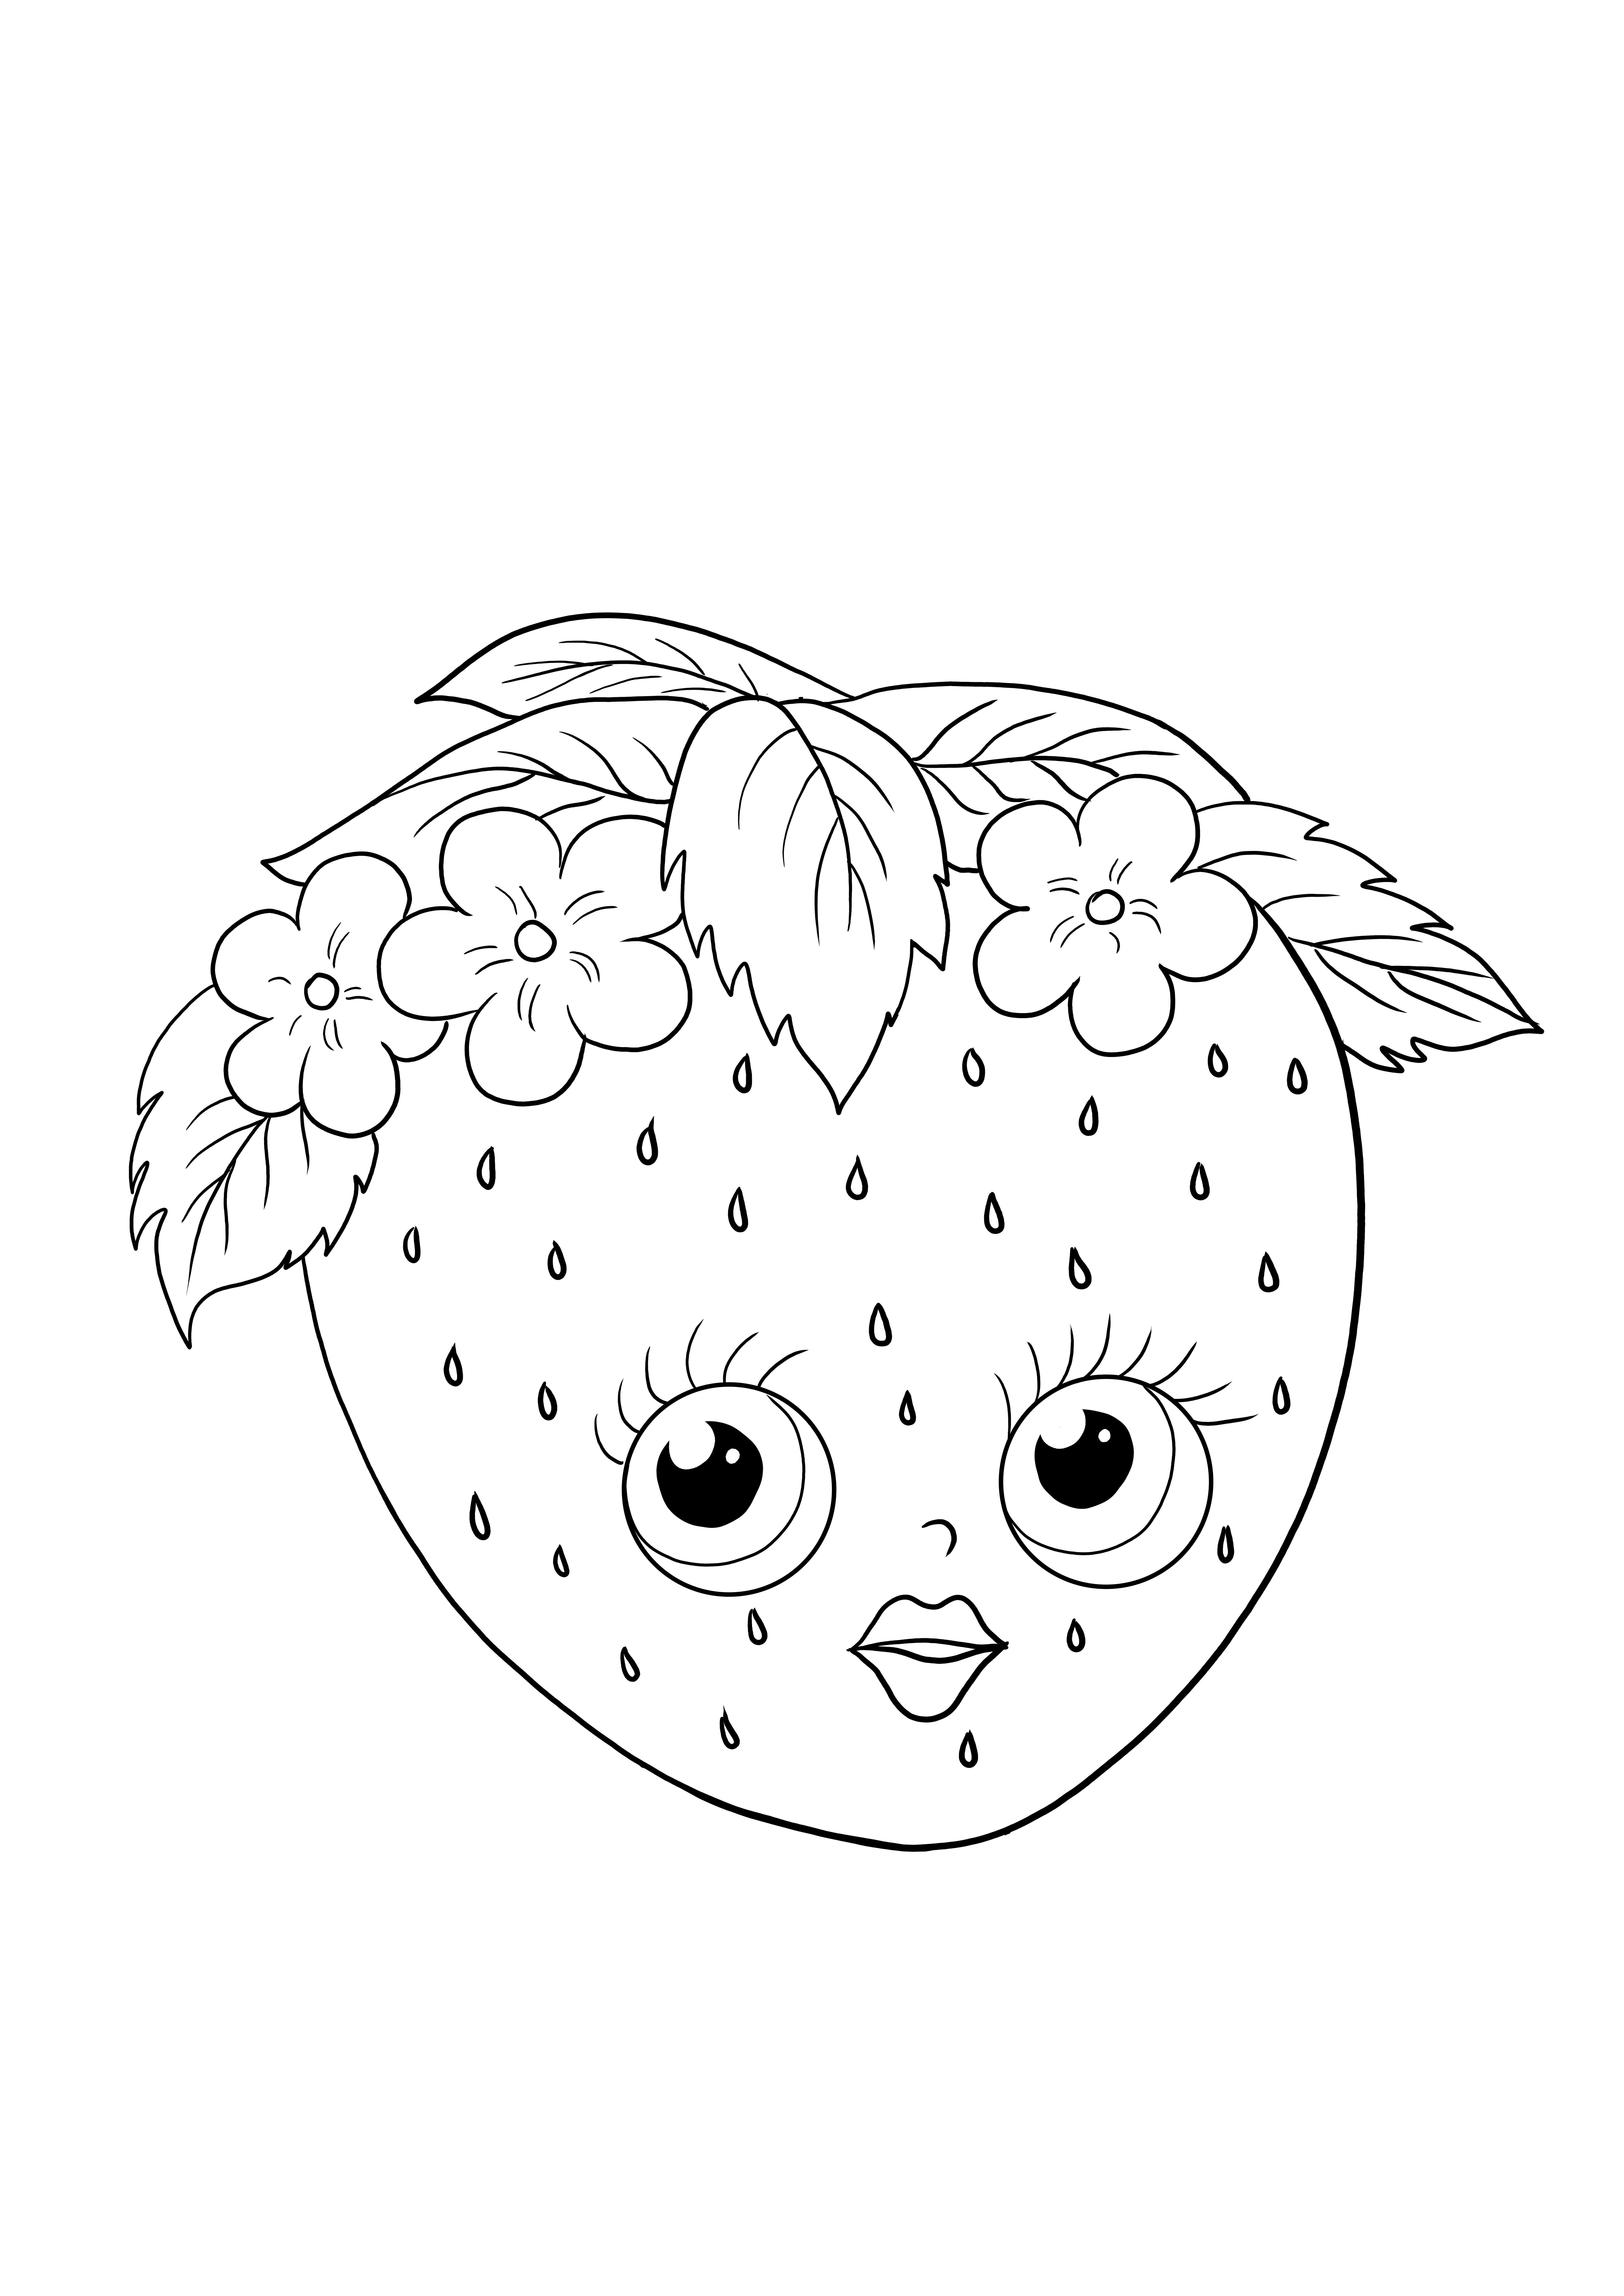 Strawberry kiss shopkin to download or print for free to color